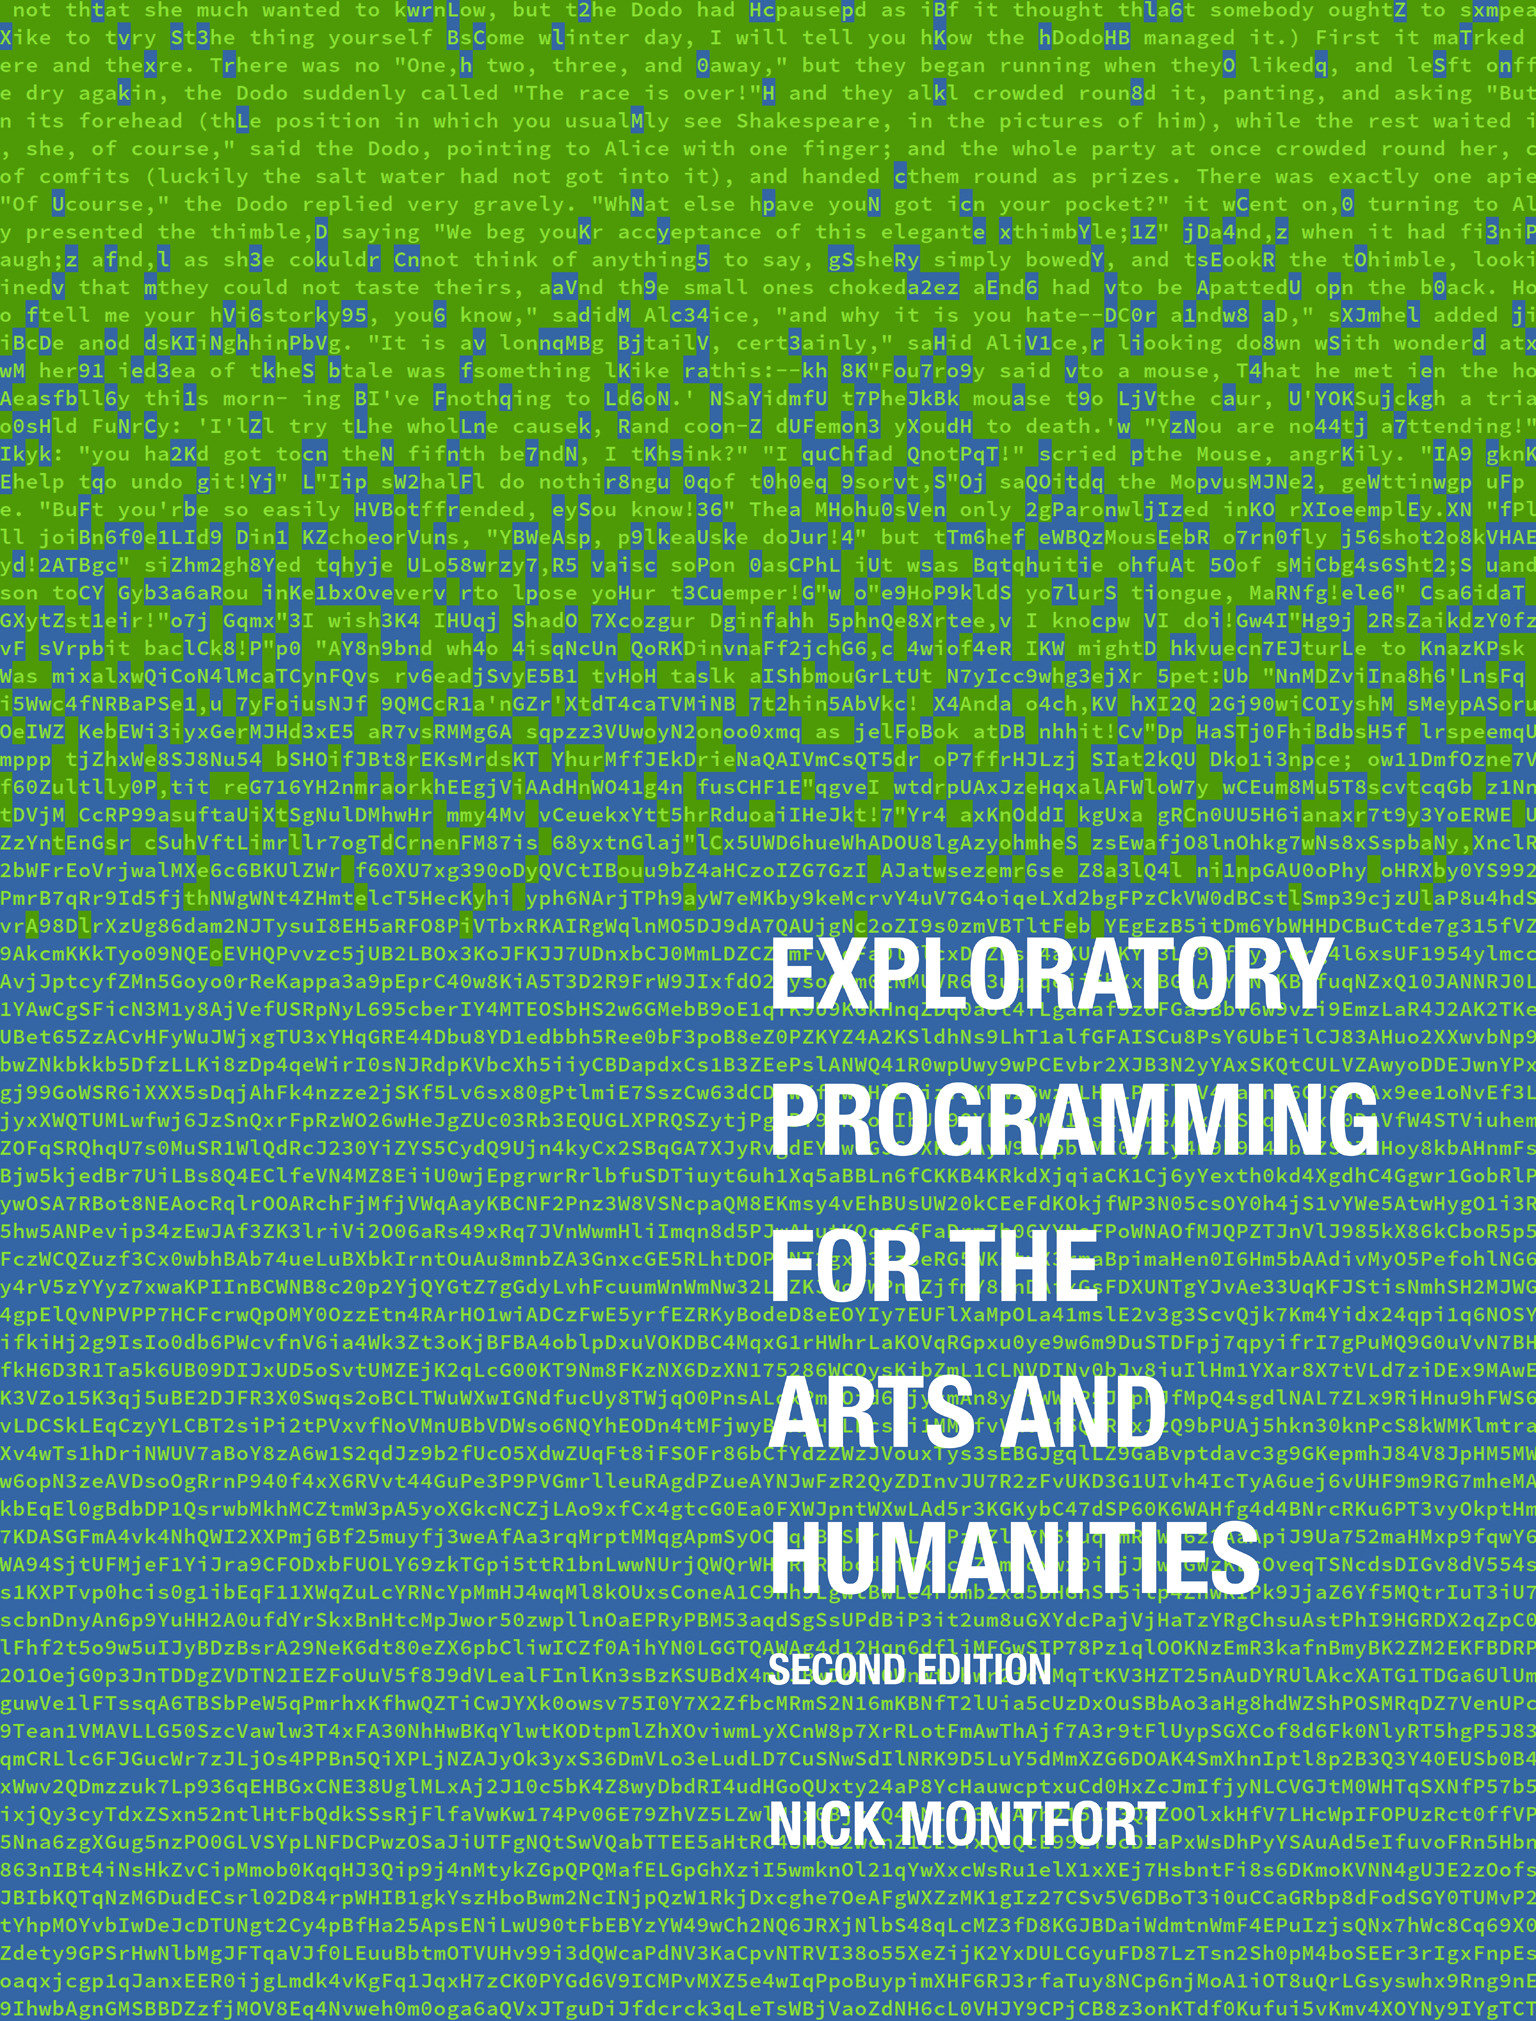 Exploratory Programming for The Arts And Humanities, Second Edition (Hardcover Book)